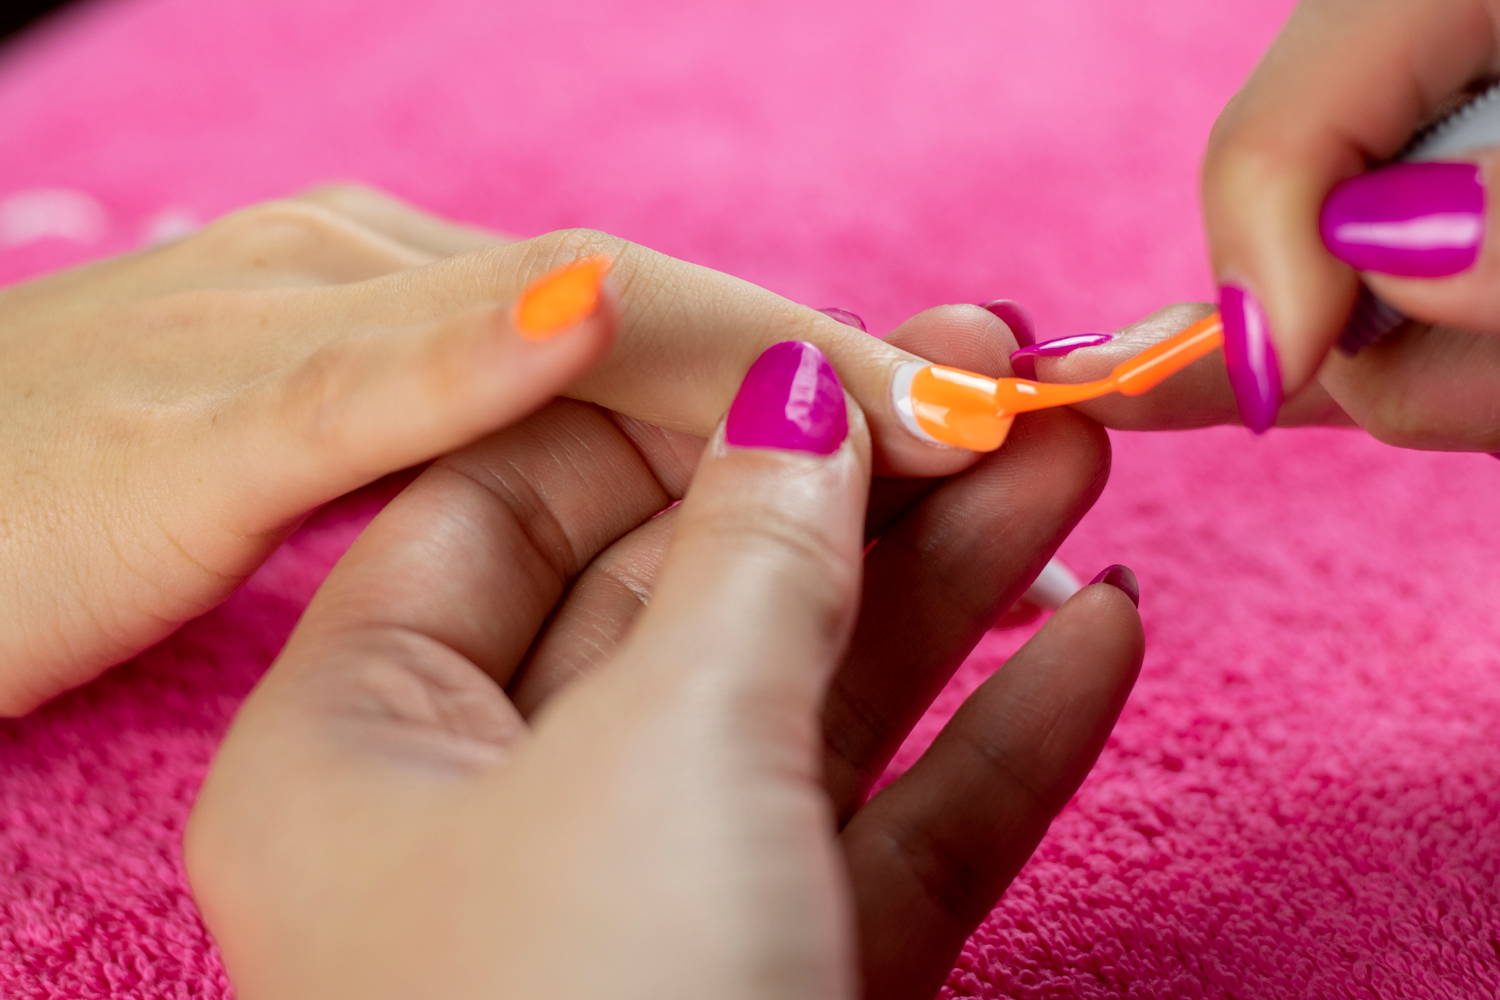 ORLY Melt Your Popsicle nail polish being painted onto nails to create pumpkin nails